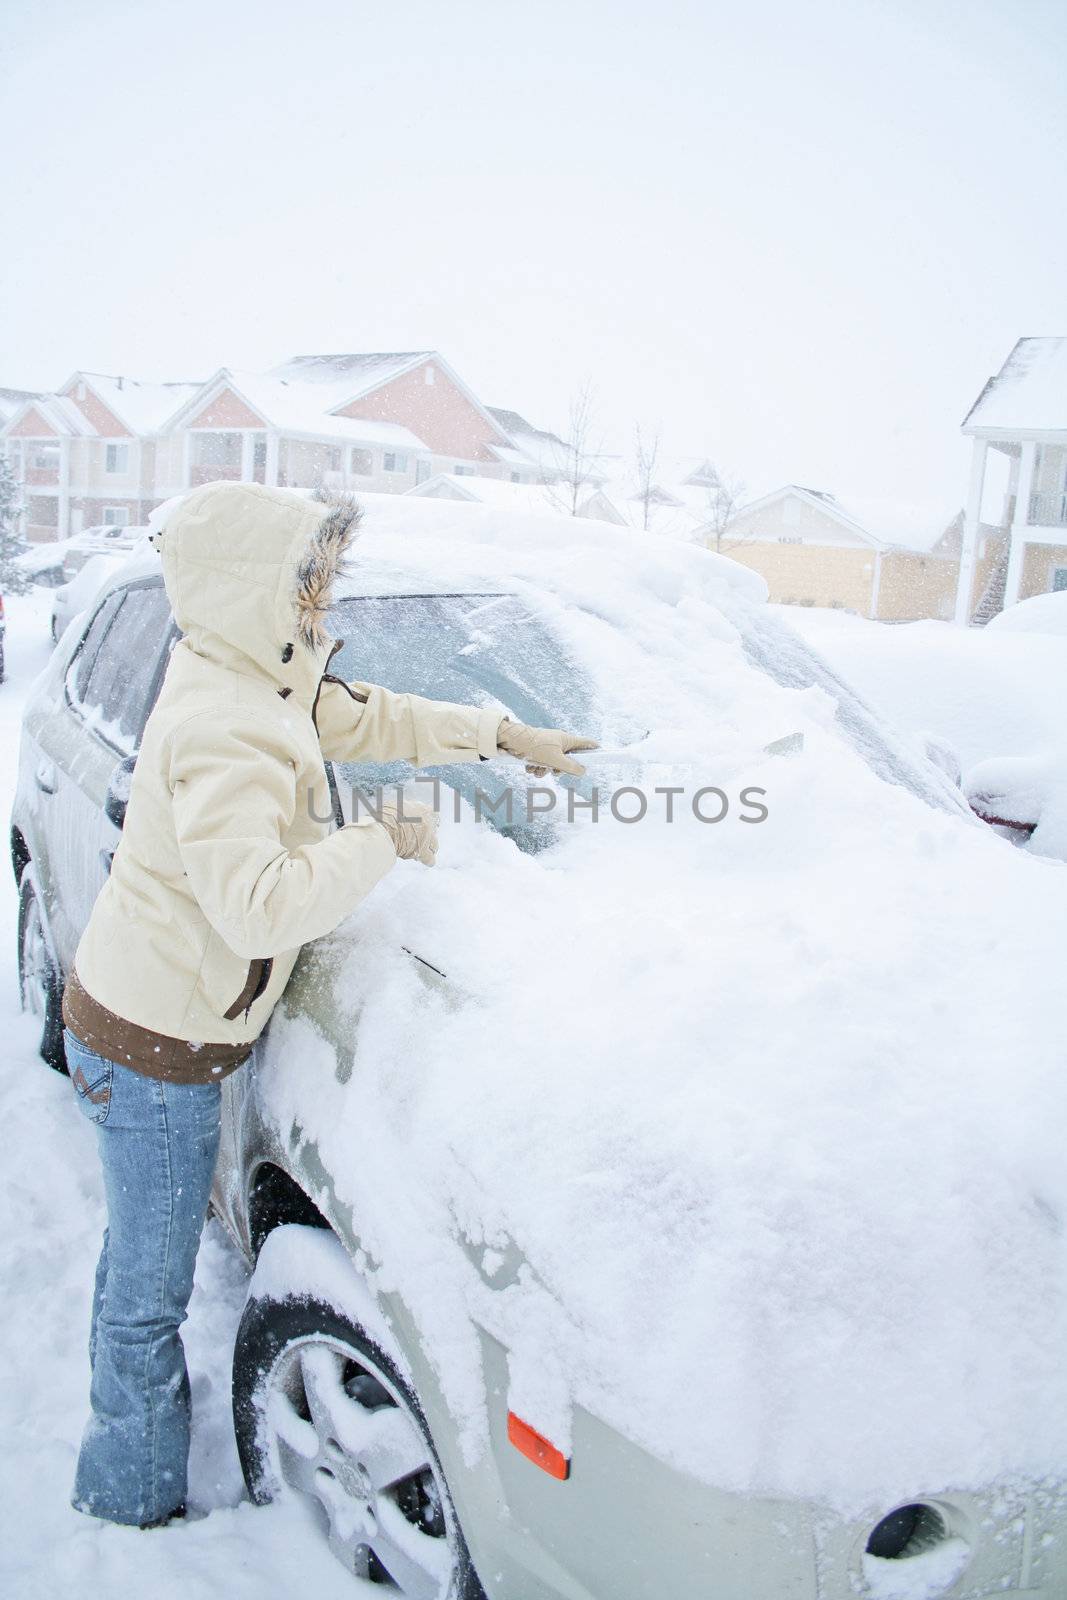 Woman removing snow from windshield